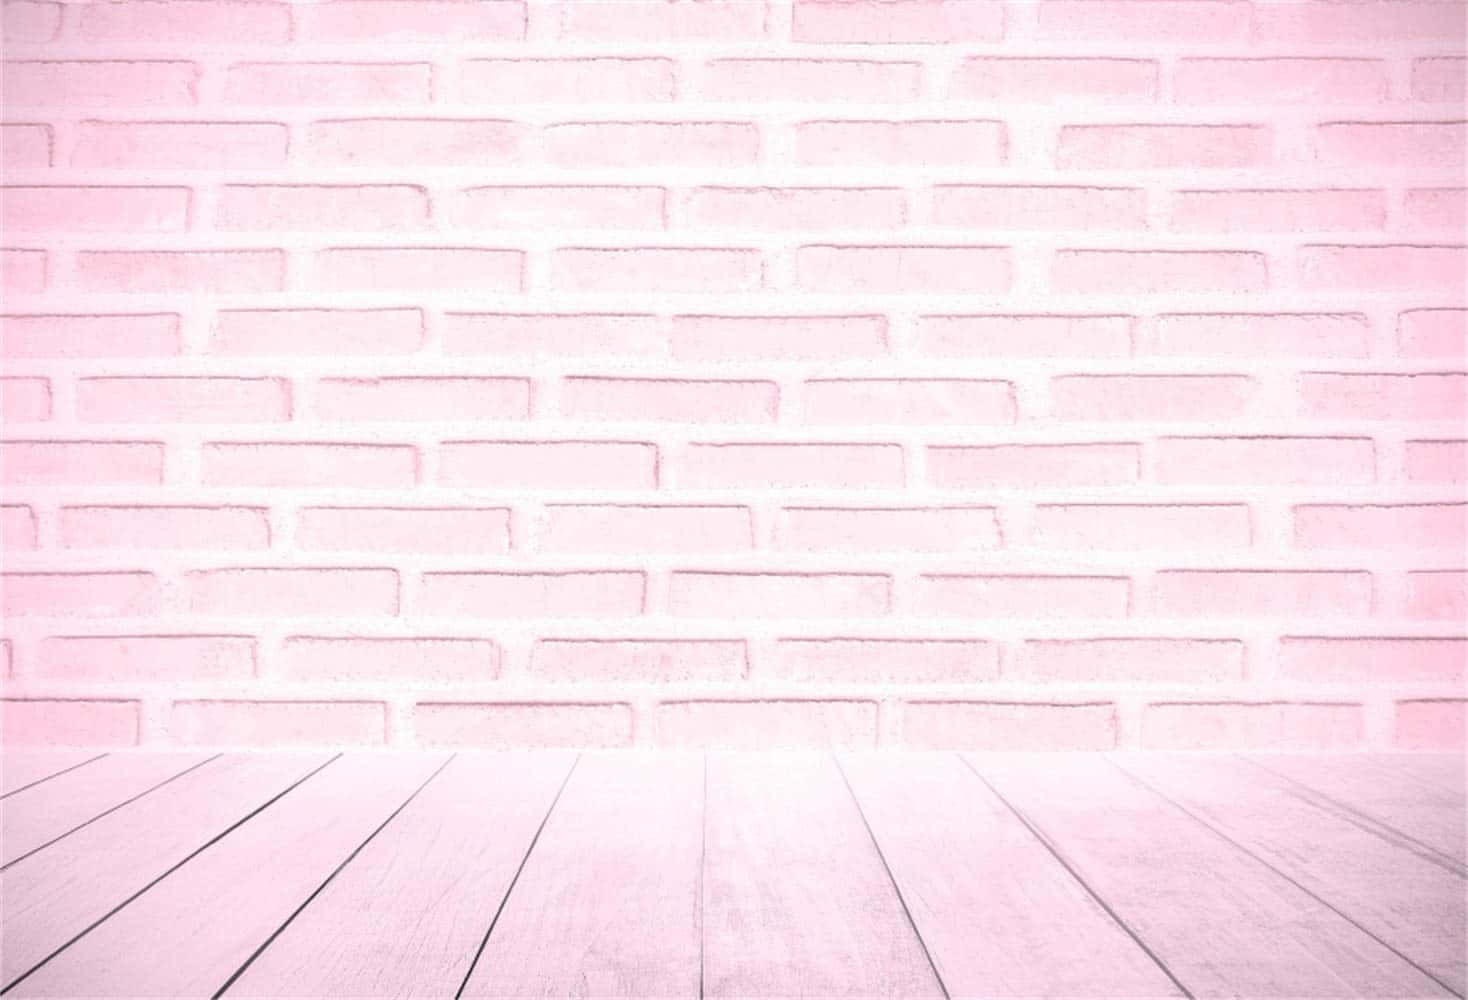 Caption: Aesthetic Pink Wall Texture Wallpaper